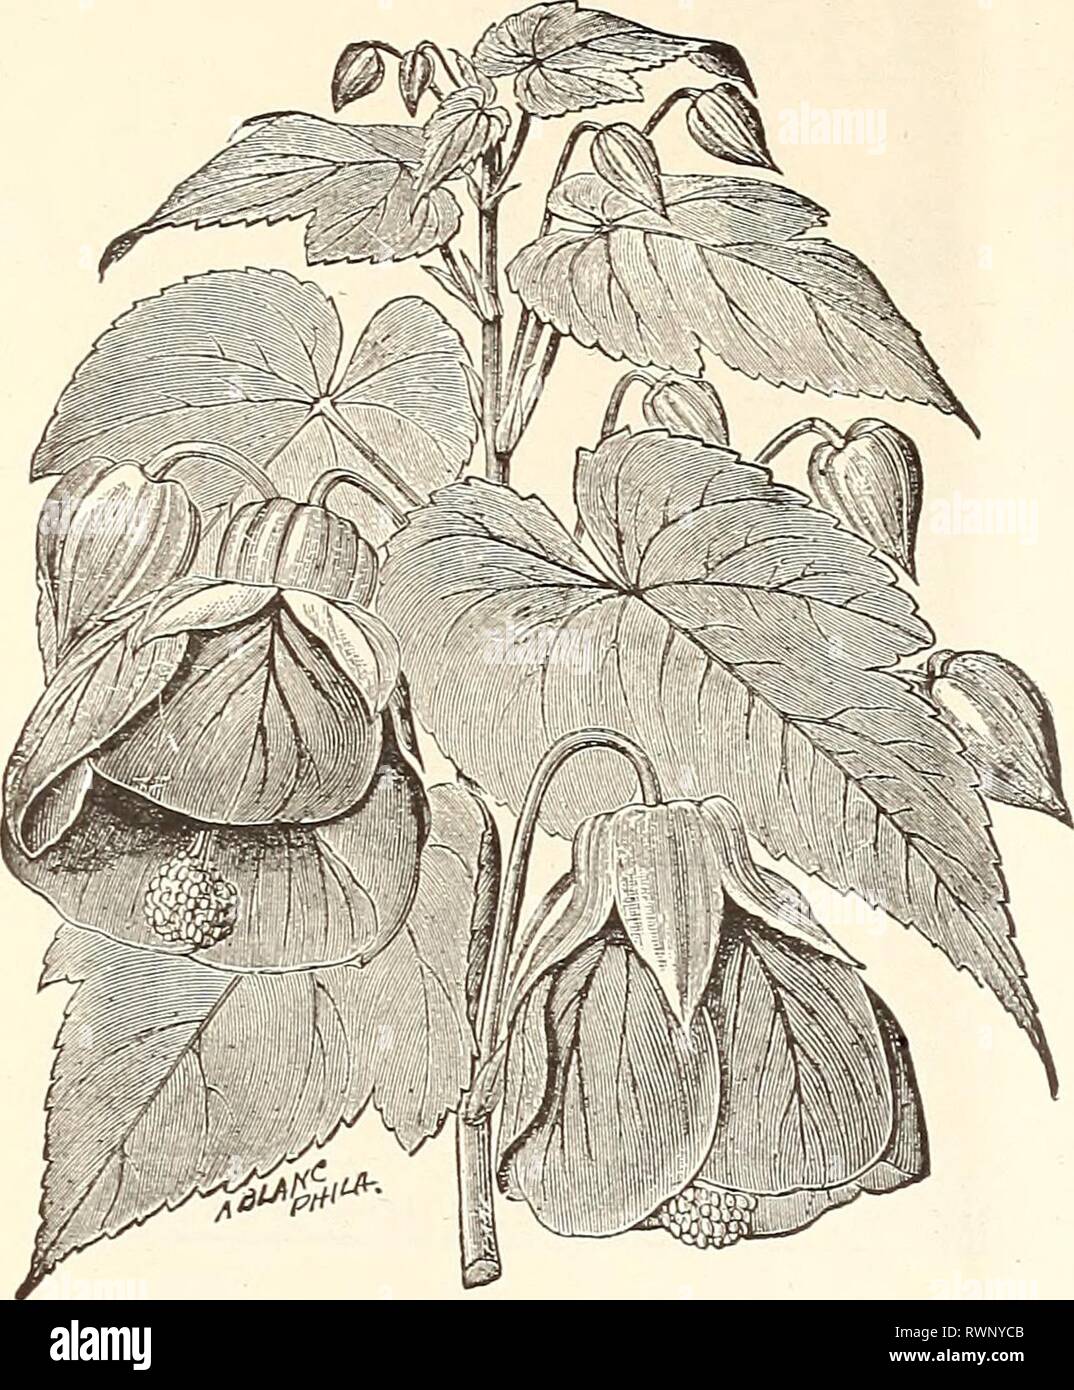 Elliott's 1845 to 1895  Elliott's 1845 to 1895 : 50th annual edition elliotts1845to181895wmel Year: 1895  WM. ELLIOTT & SONS' GENERAL CATALOGUE FOR ISfo.    ABUTILON (CHINESE BELL FLOWER.) Popular and easily grown greenhouse or indoor plants, with drooping bell-shaped flowers, richly veined and striped. Grow rapidly in sandy loam, and are very effective when plunged in the border in summer. Half-hardy shrubs. Per Pkt. Abutilon. Extra fine Mixed. From new fertilized sorts 25 ADLUMIA. (MOUNTAIN FRINGE.) X. beautiful perennial climber, w-ith elegant foliage, re- sembling the maiden-hair Fern. Sow Stock Photo